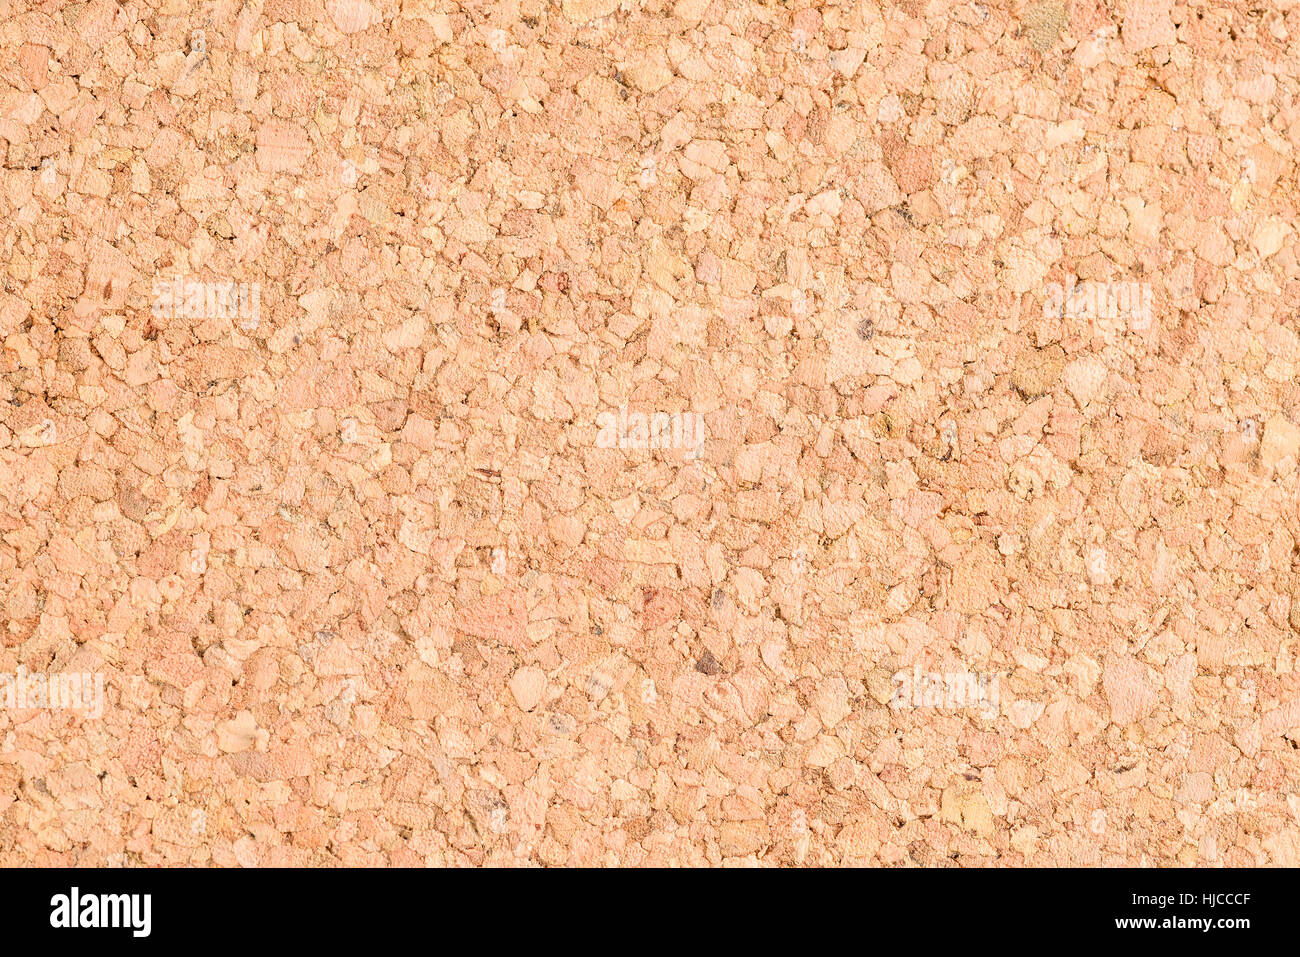 Abstract cork background in tight pattern. Stock Photo